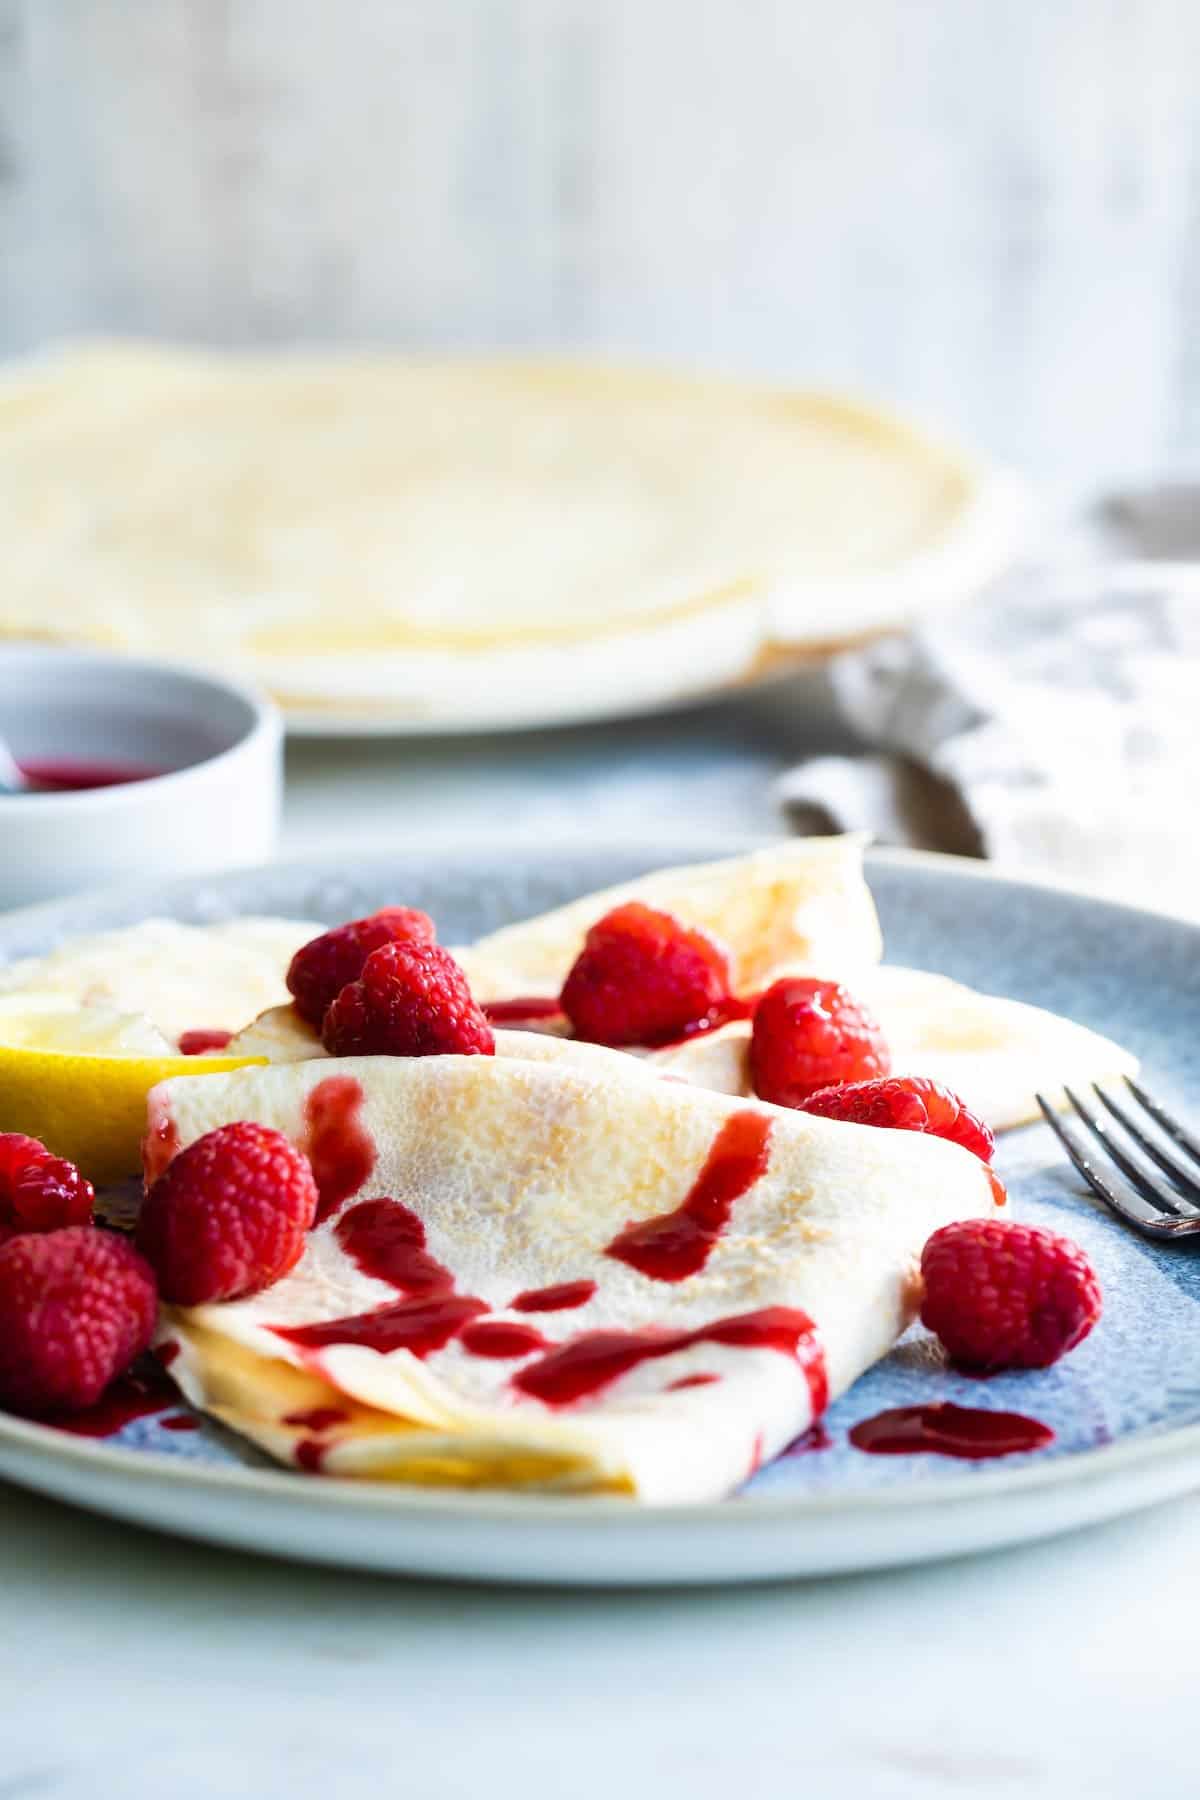 Plate of lemon crepes with raspberry sauce.